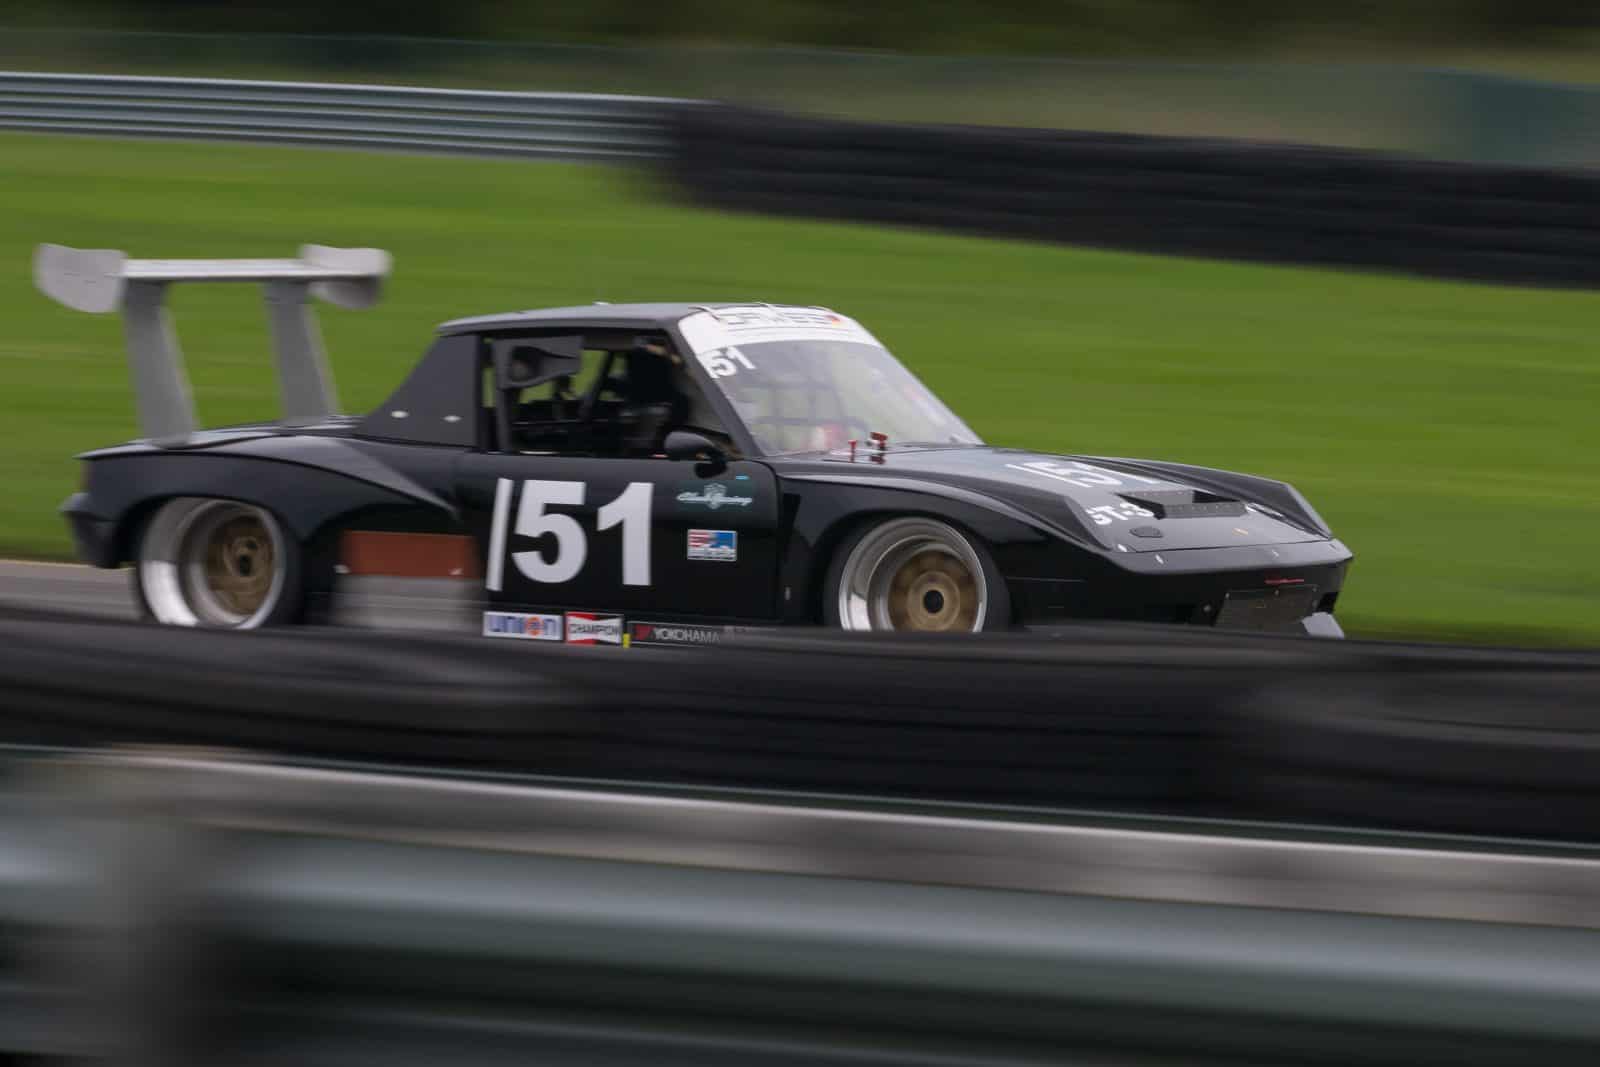 914 Porsche racing with the PCA at NJMP